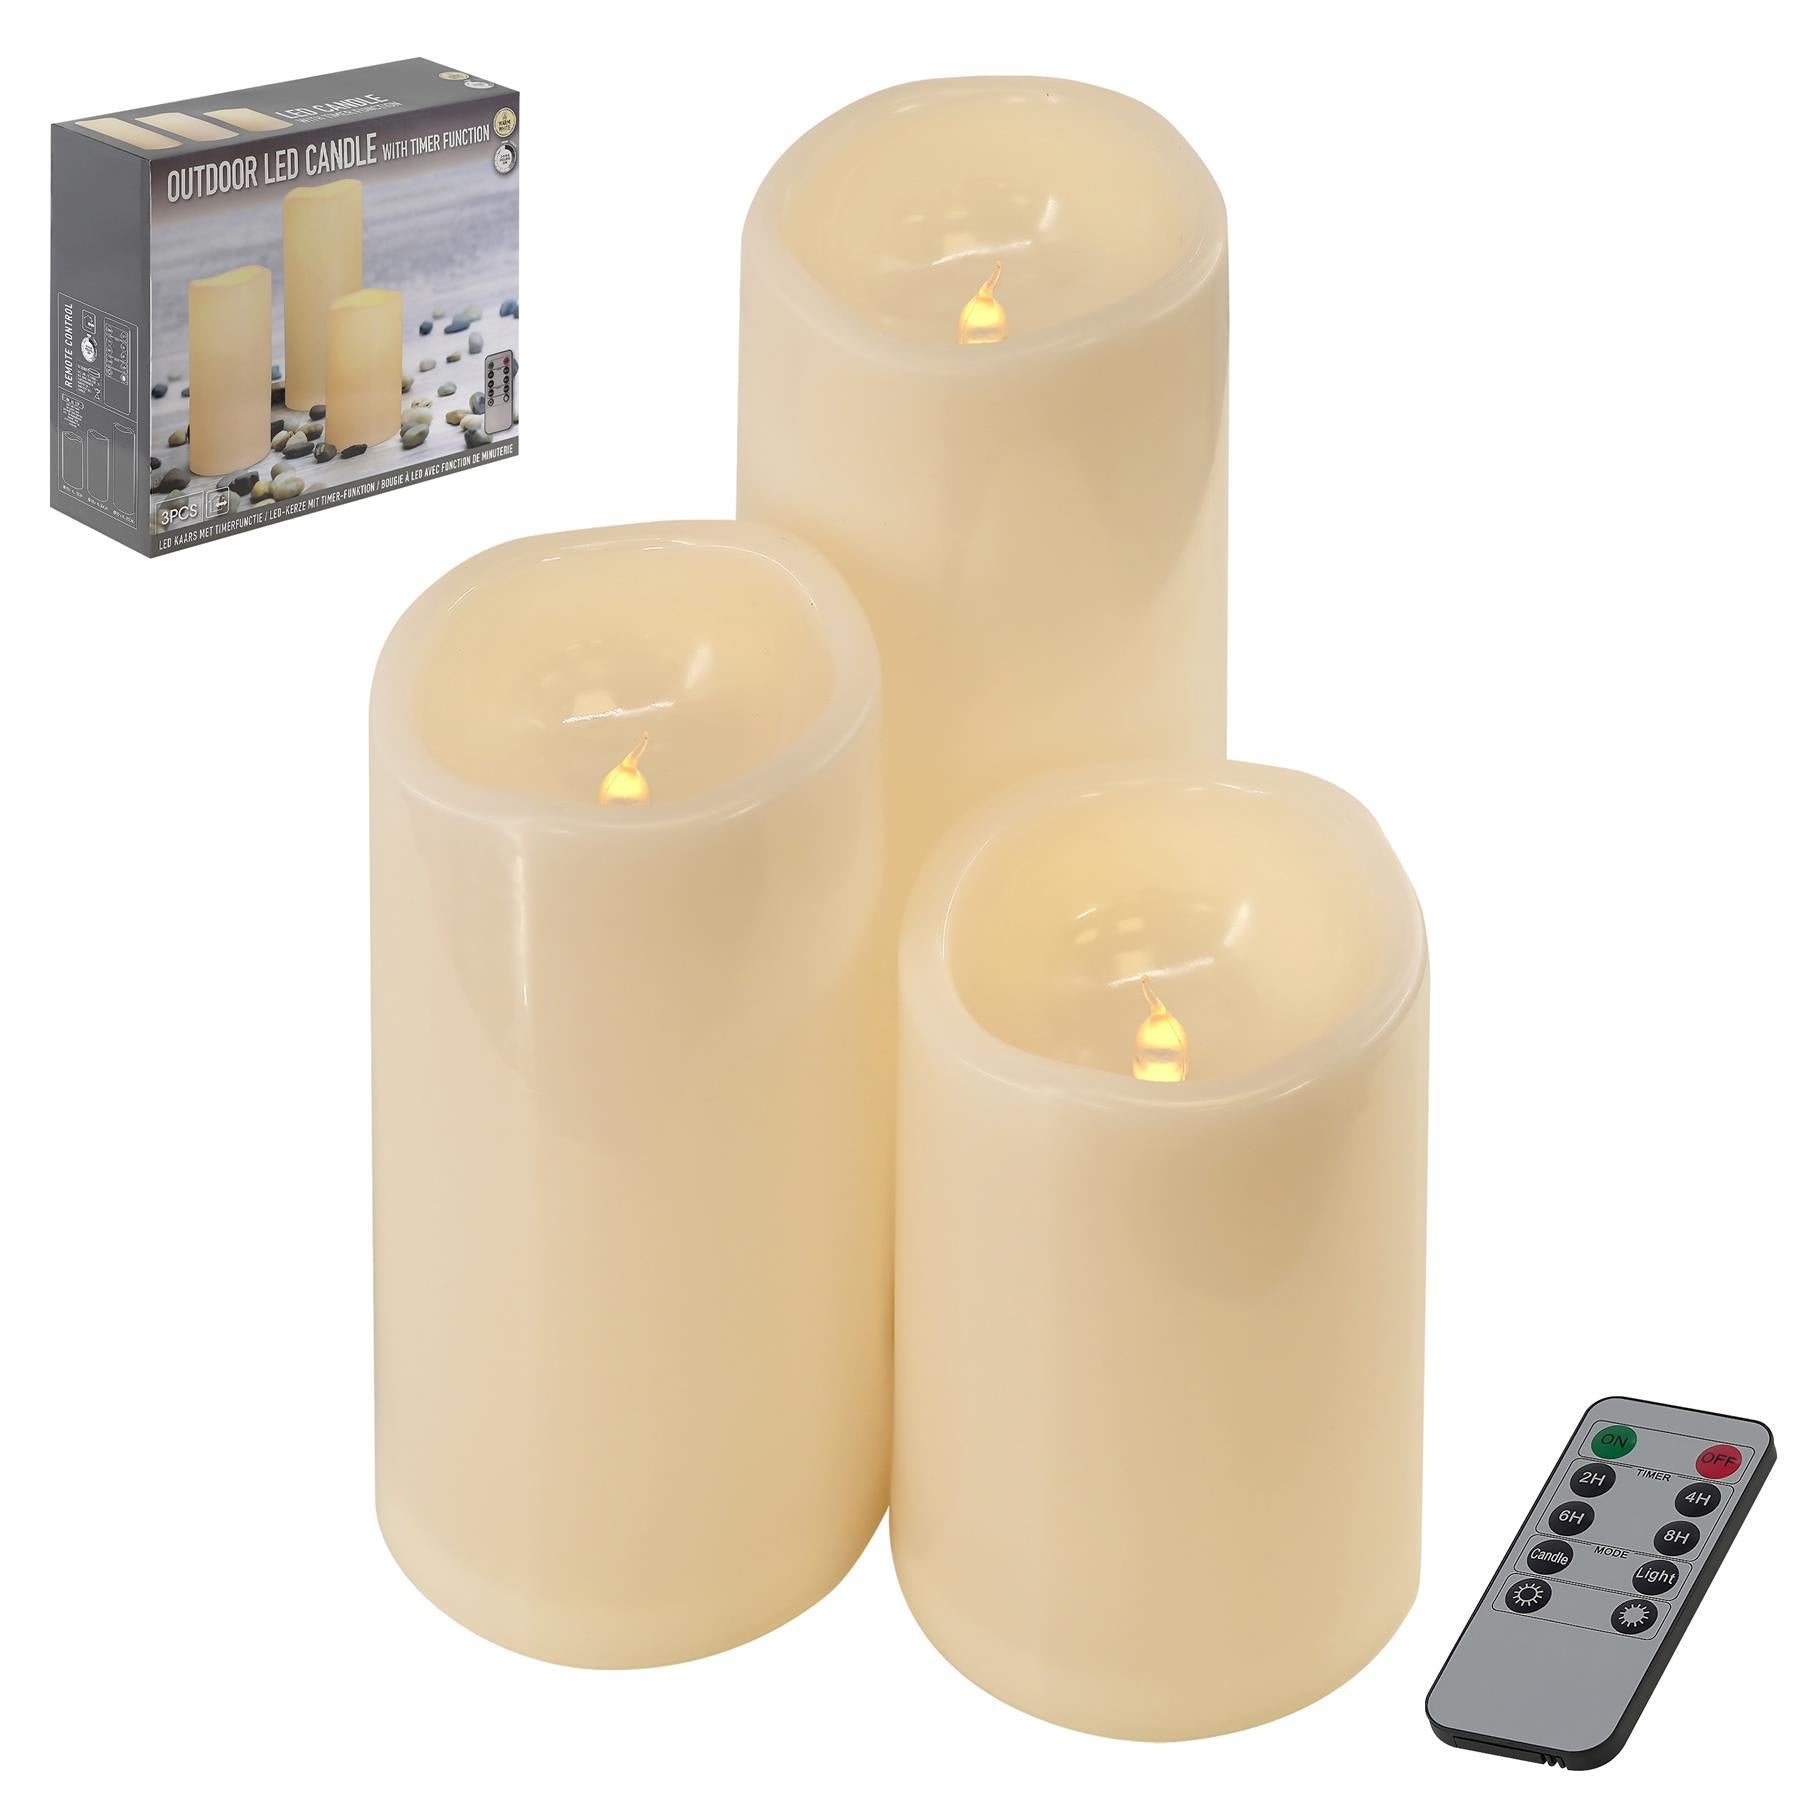 Geezy Outdoor LED Candle Set 3 Pcs Outdoor LED Candle Light